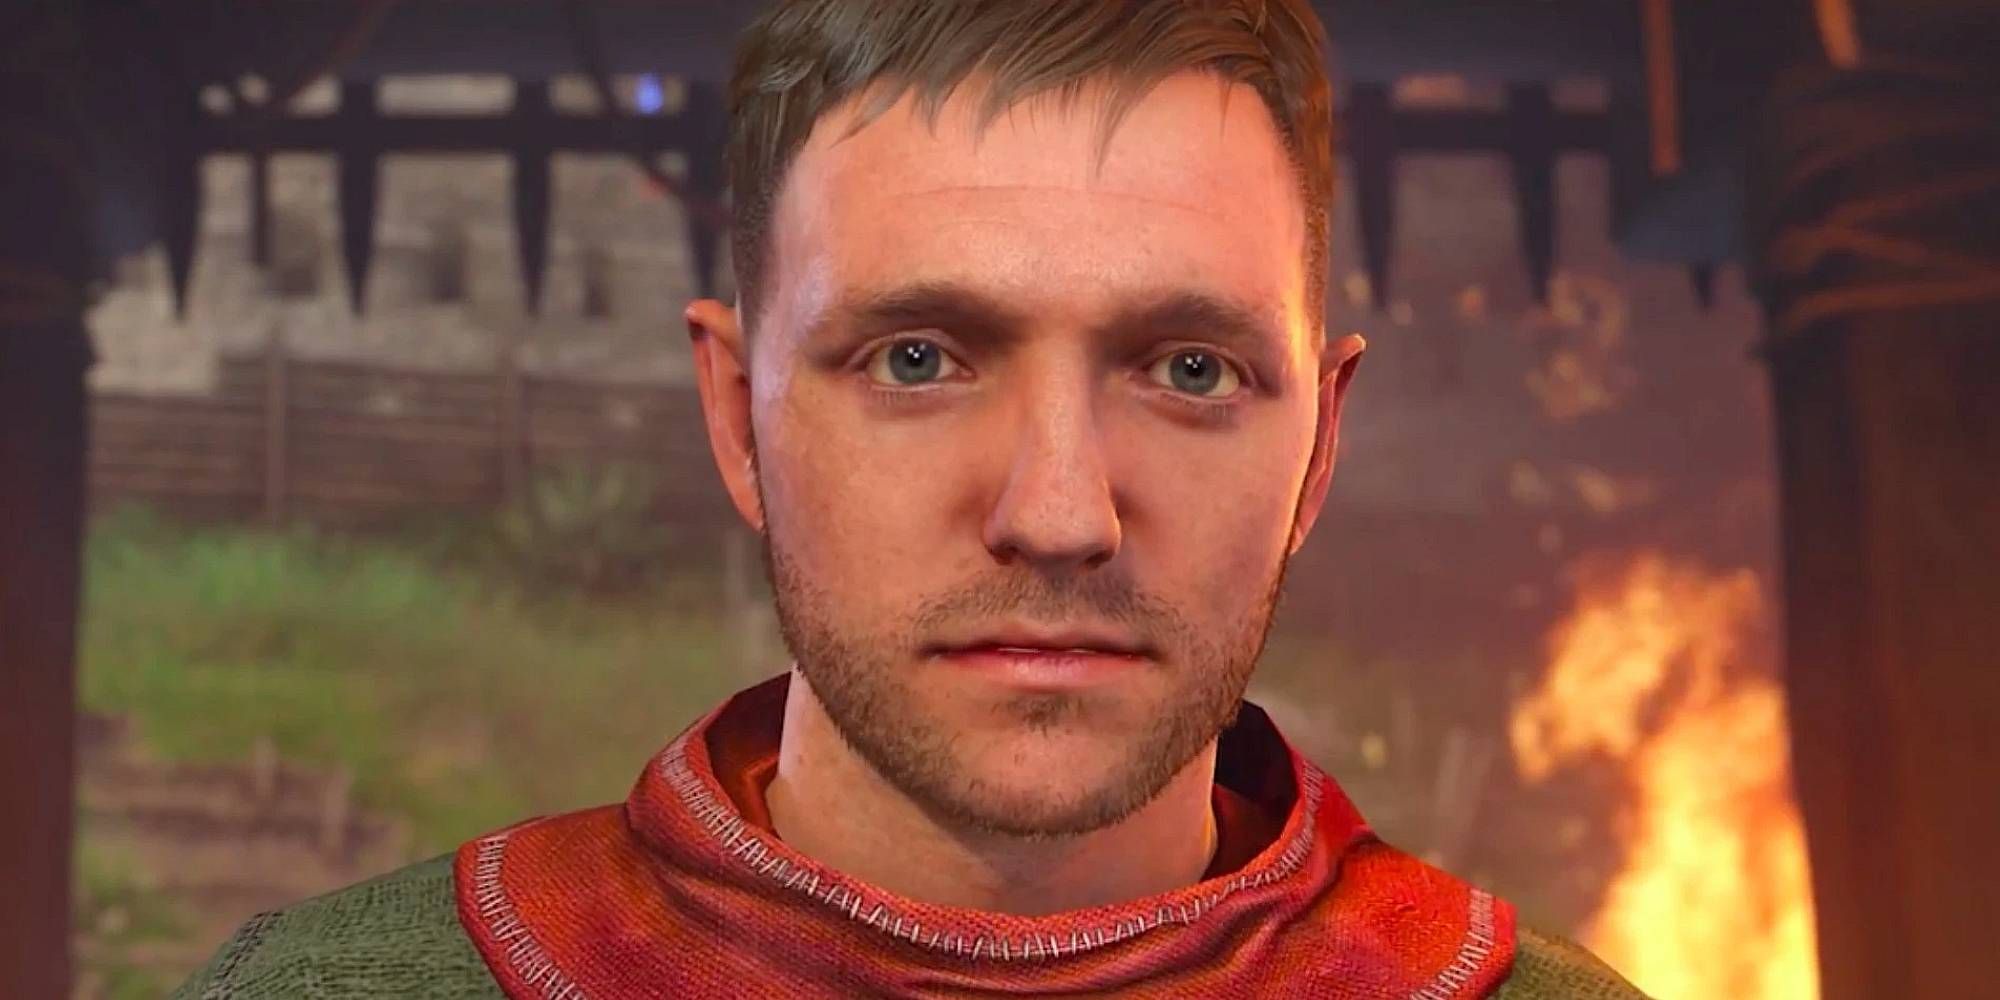 Henry stands at a castle gate as fire burns behind him in Kingdom Come Deliverance.